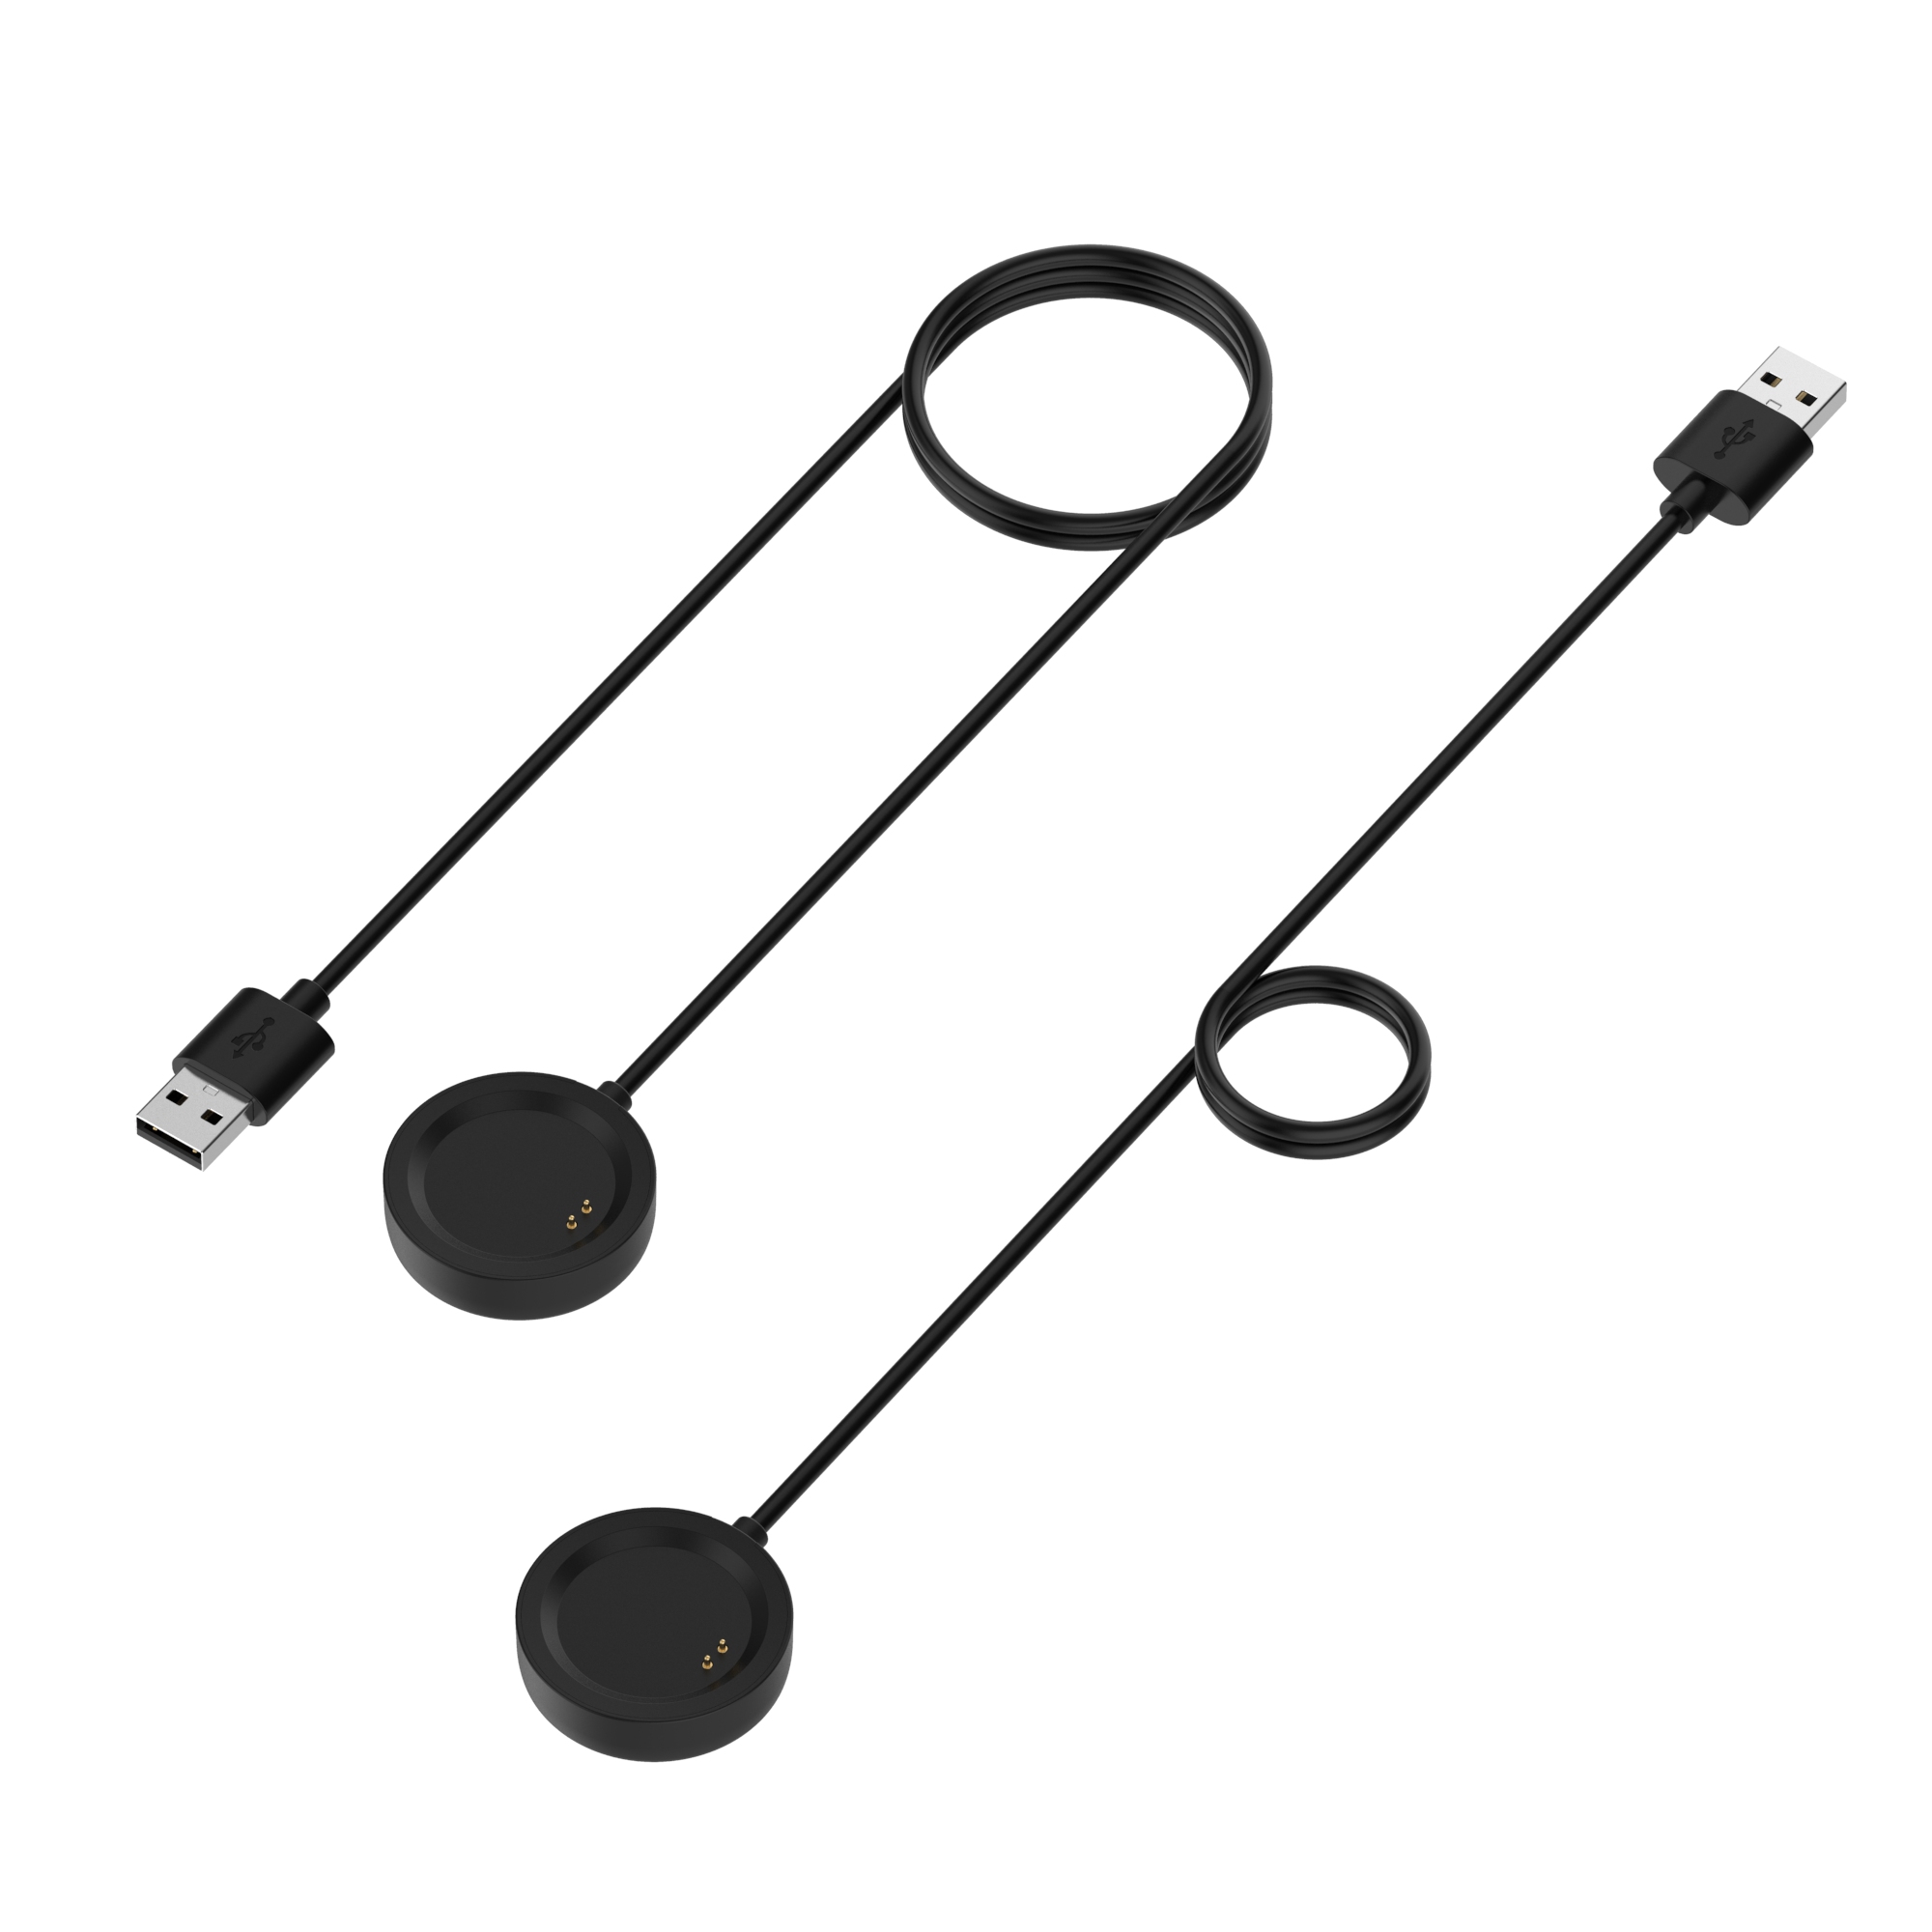 Bakeey-1m-Watch-Cable-Charging-Cable-for-Oneplus-Watch-1862266-12